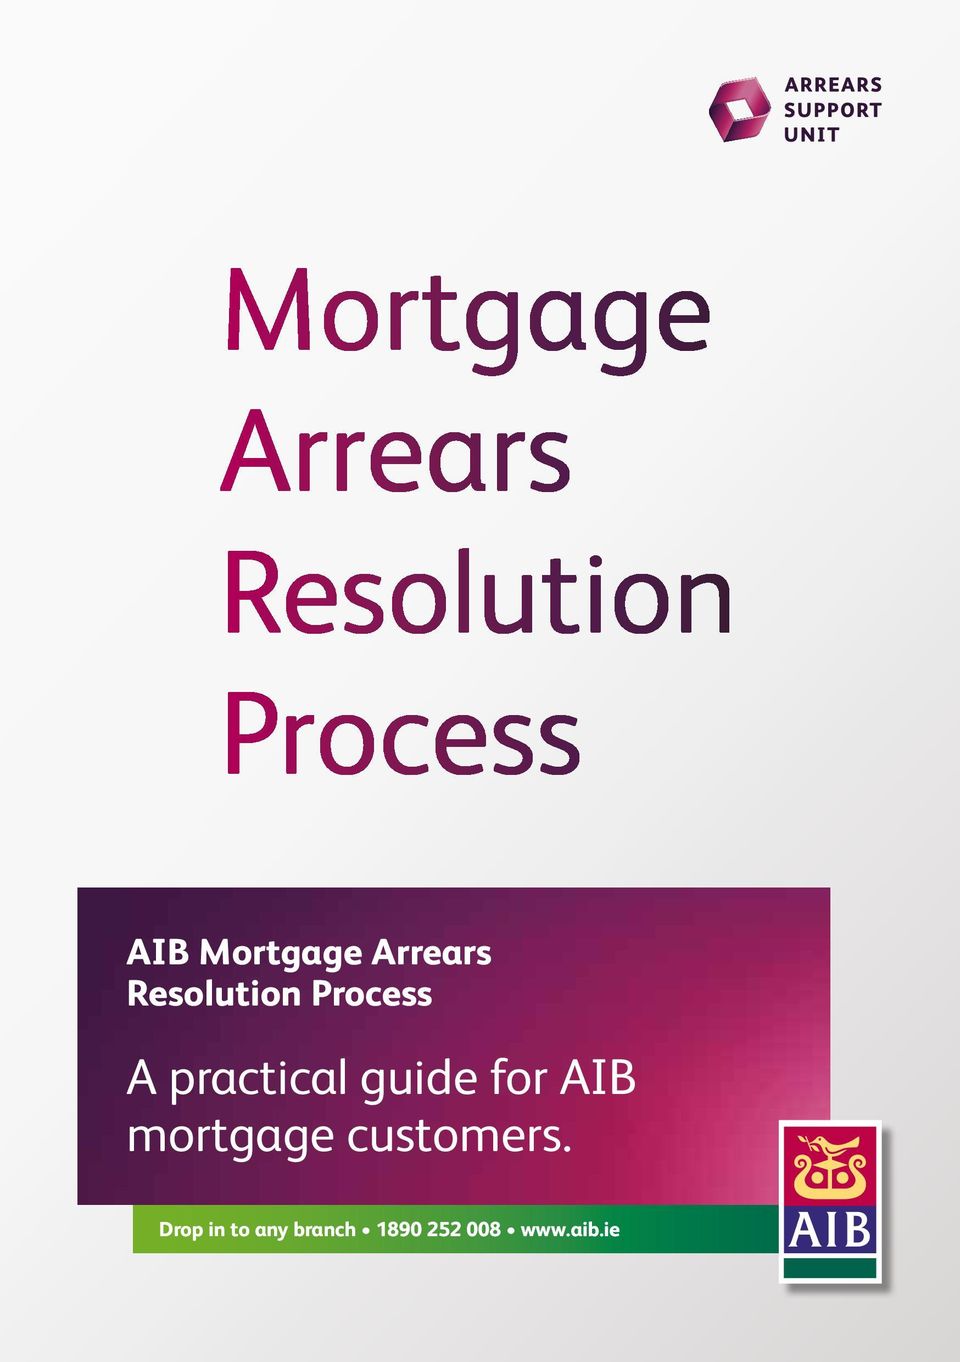 practical guide for AIB mortgage